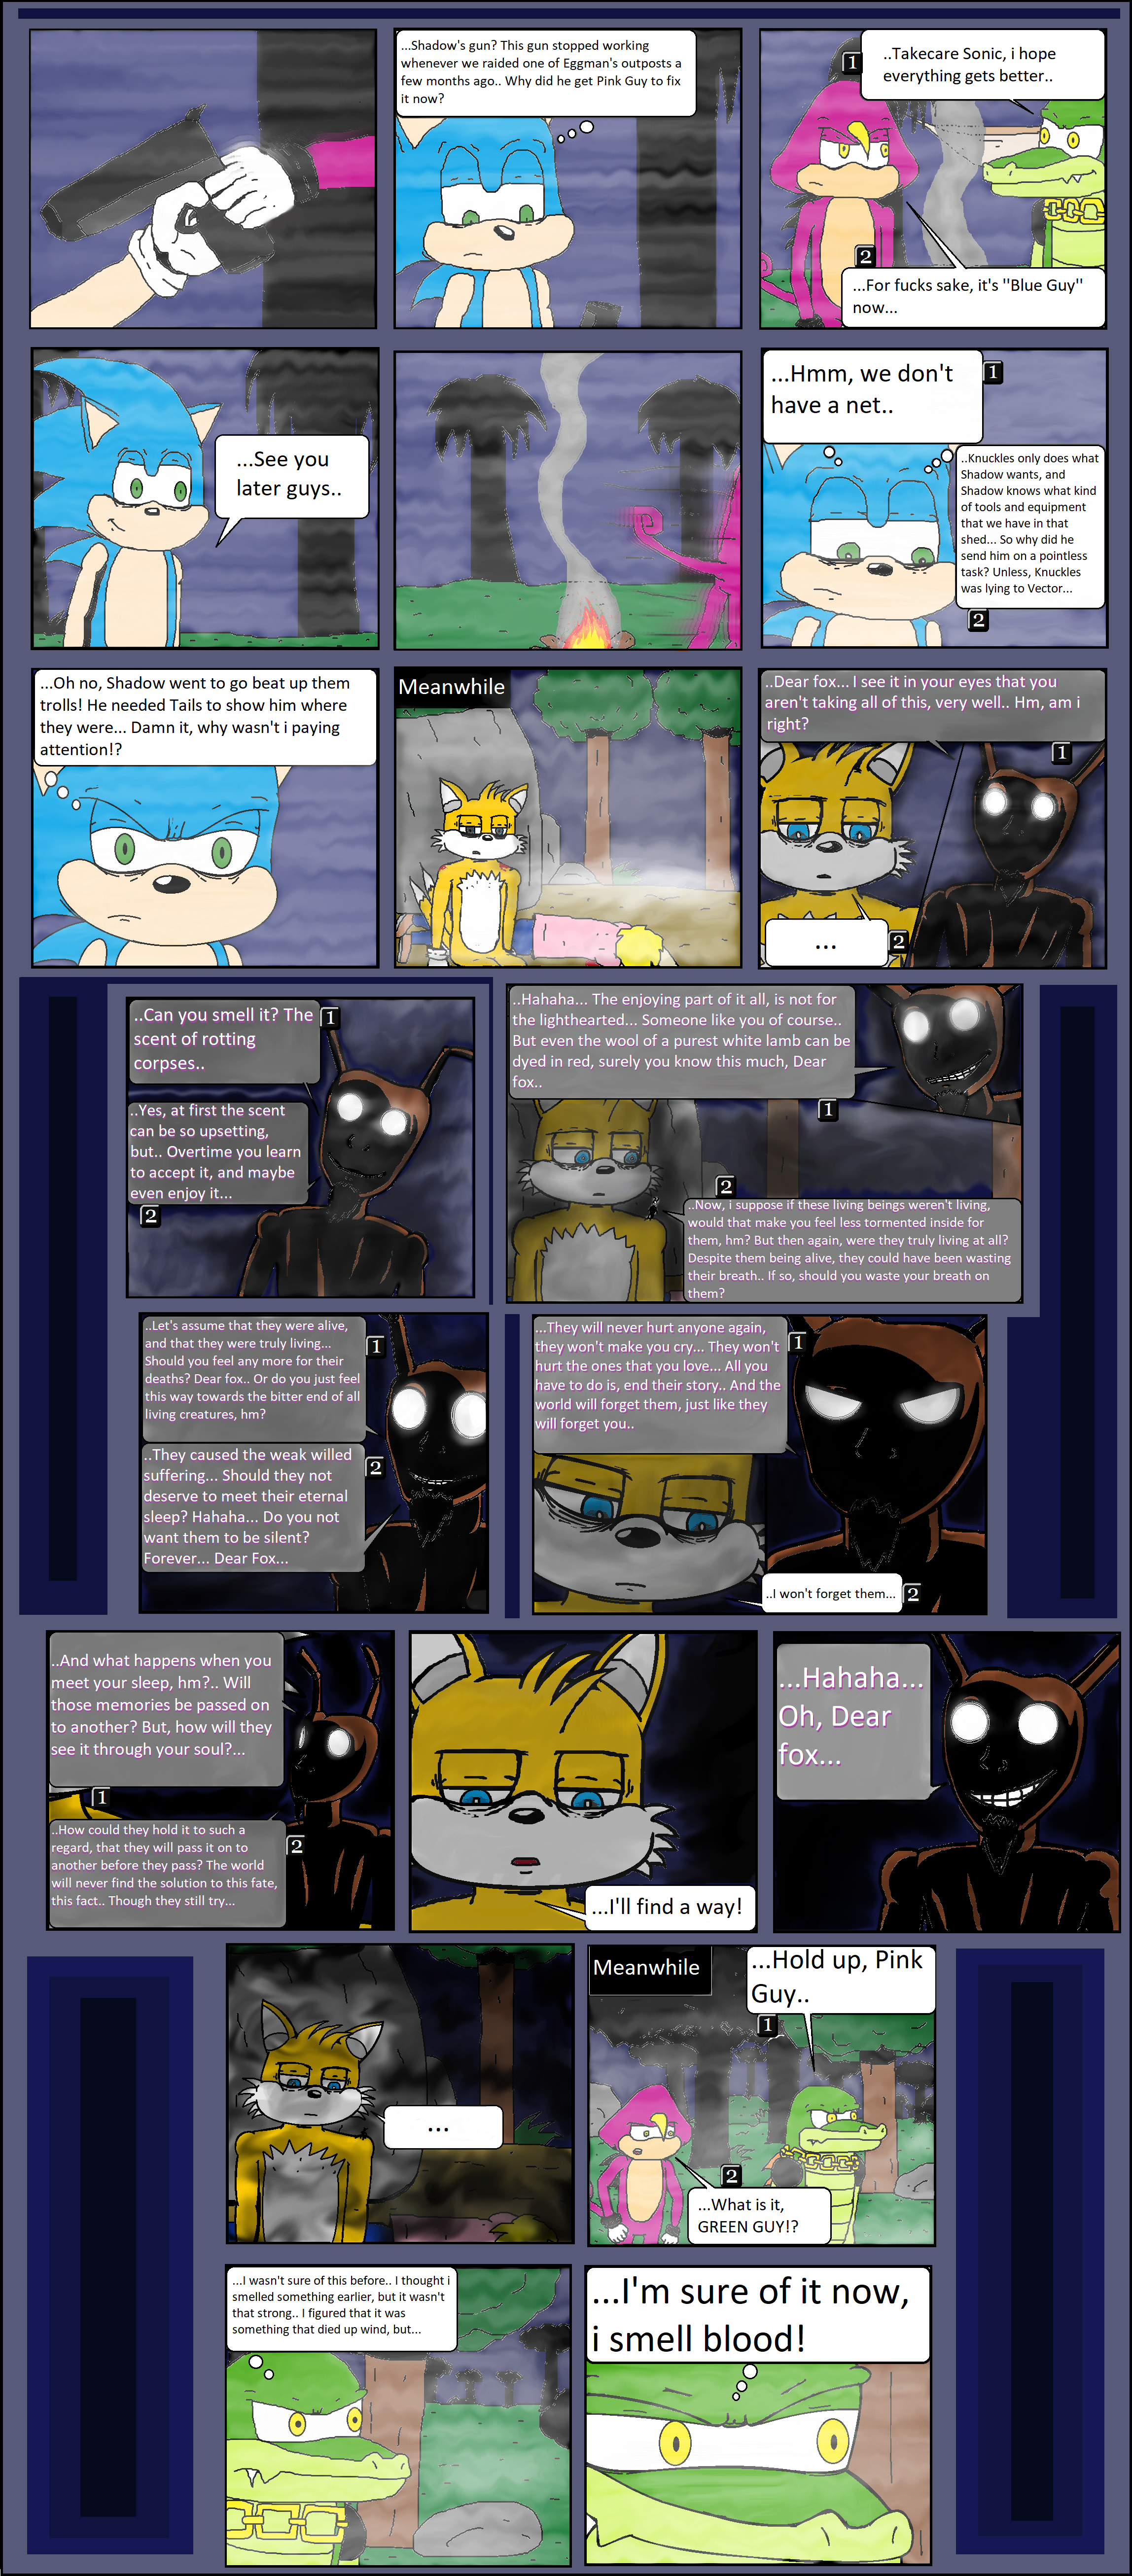 tgtp/pg30.png. If you're seeing this, enable images. Or, perhaps we have a website issue. Try refreshing, if unsuccessful email commodorian@tailsgetstrolled.org with a detailed description of how you got here.